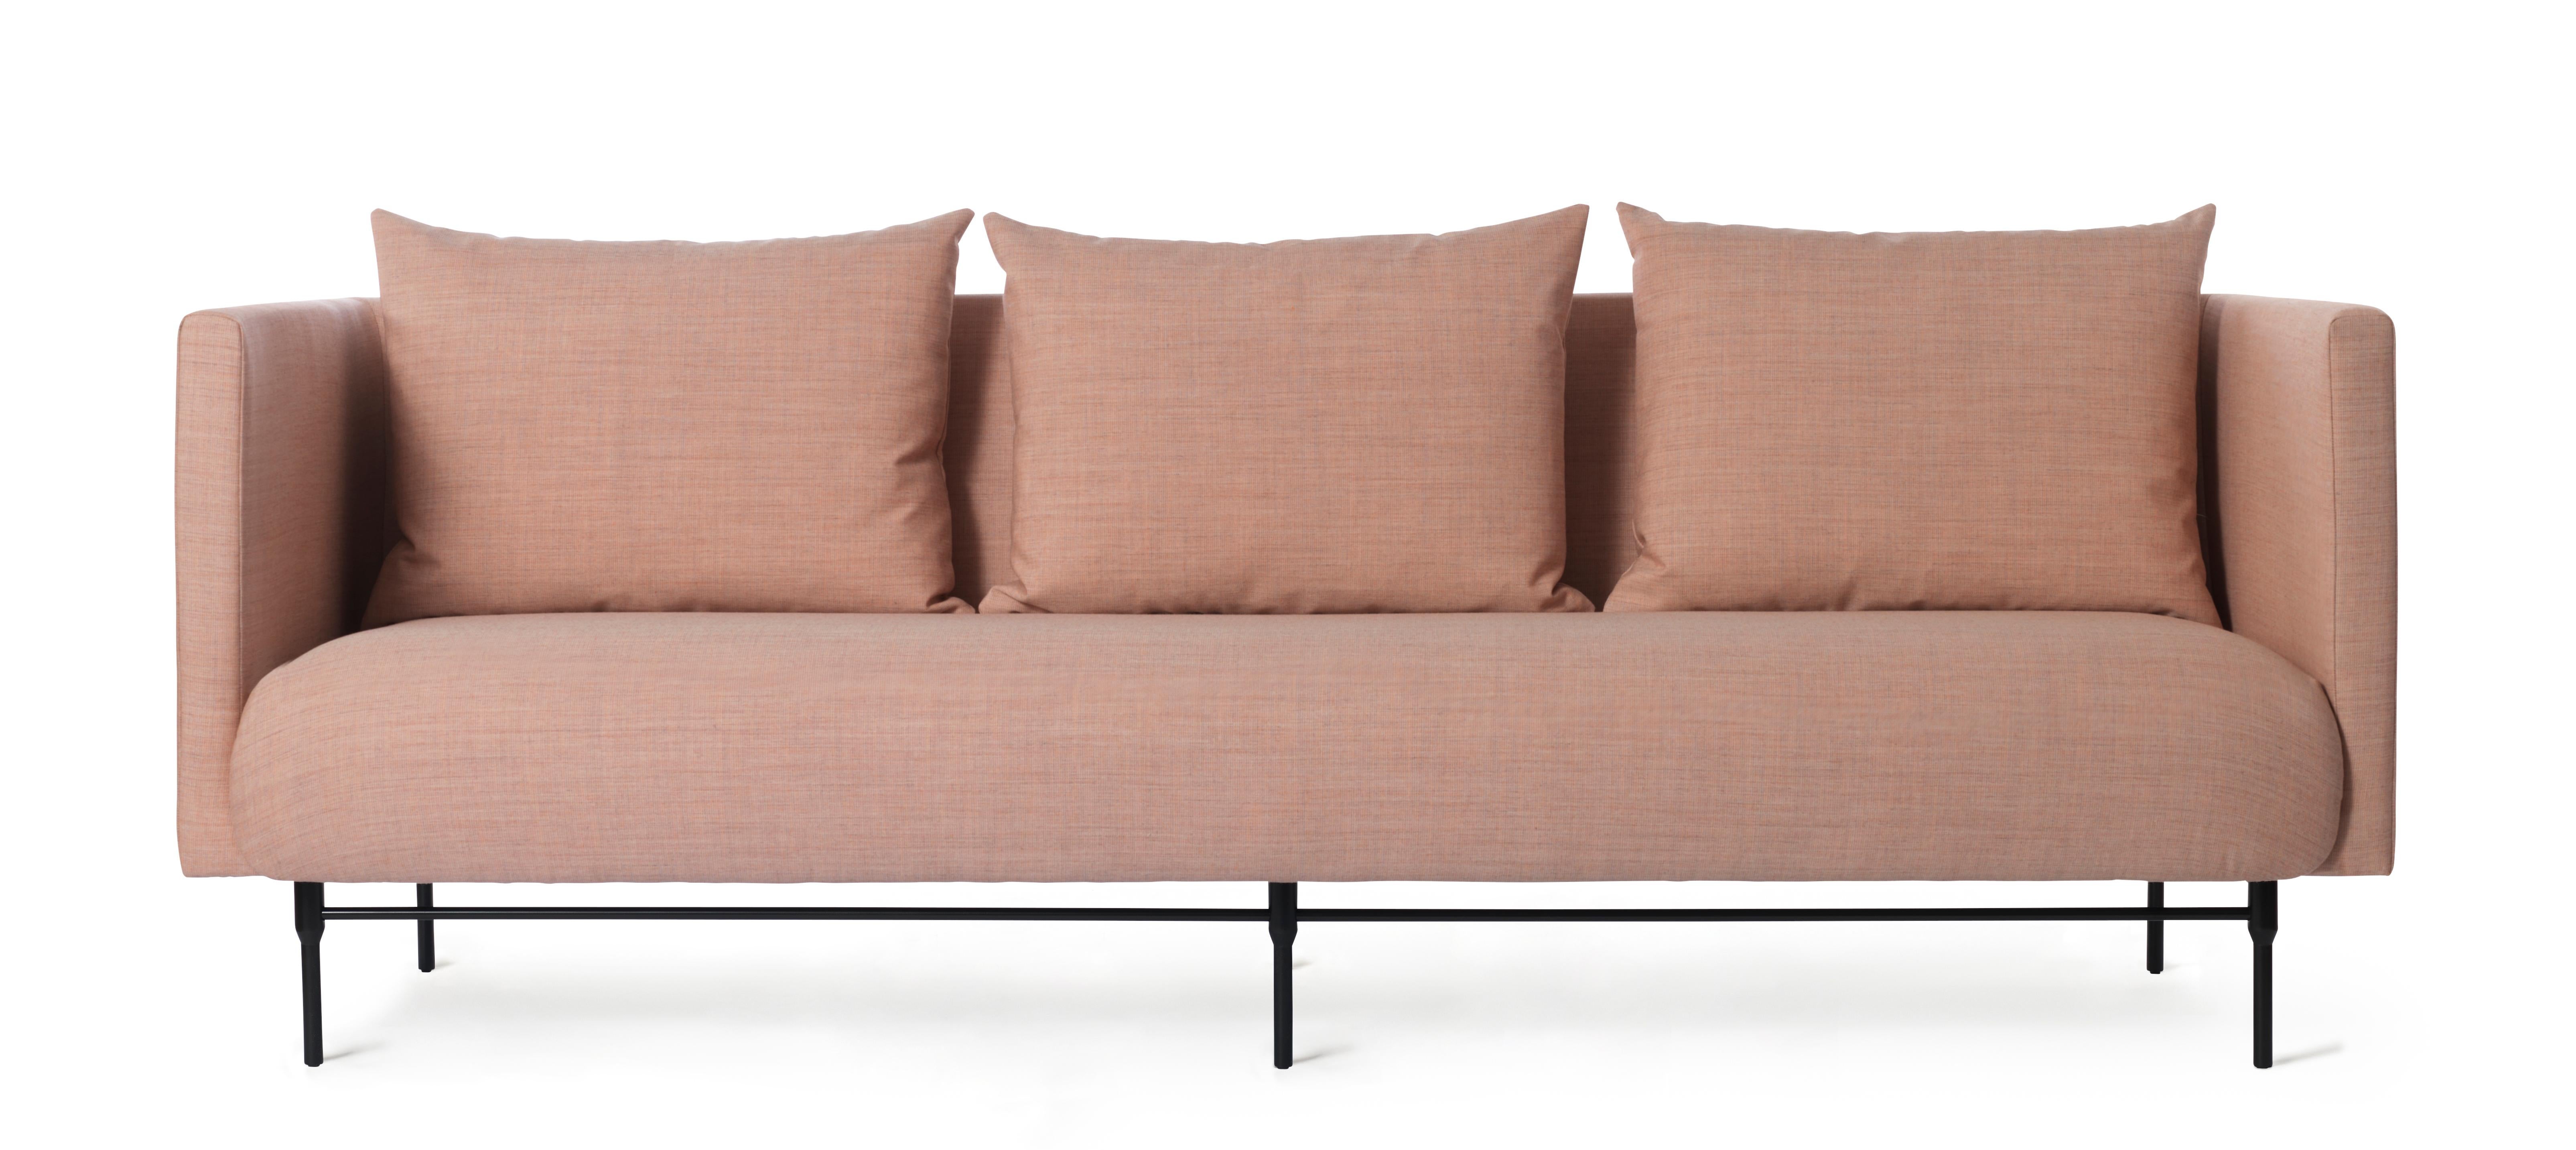 Galore 3-Seat Sofa, by Rikke Frost from Warm Nordic For Sale 5